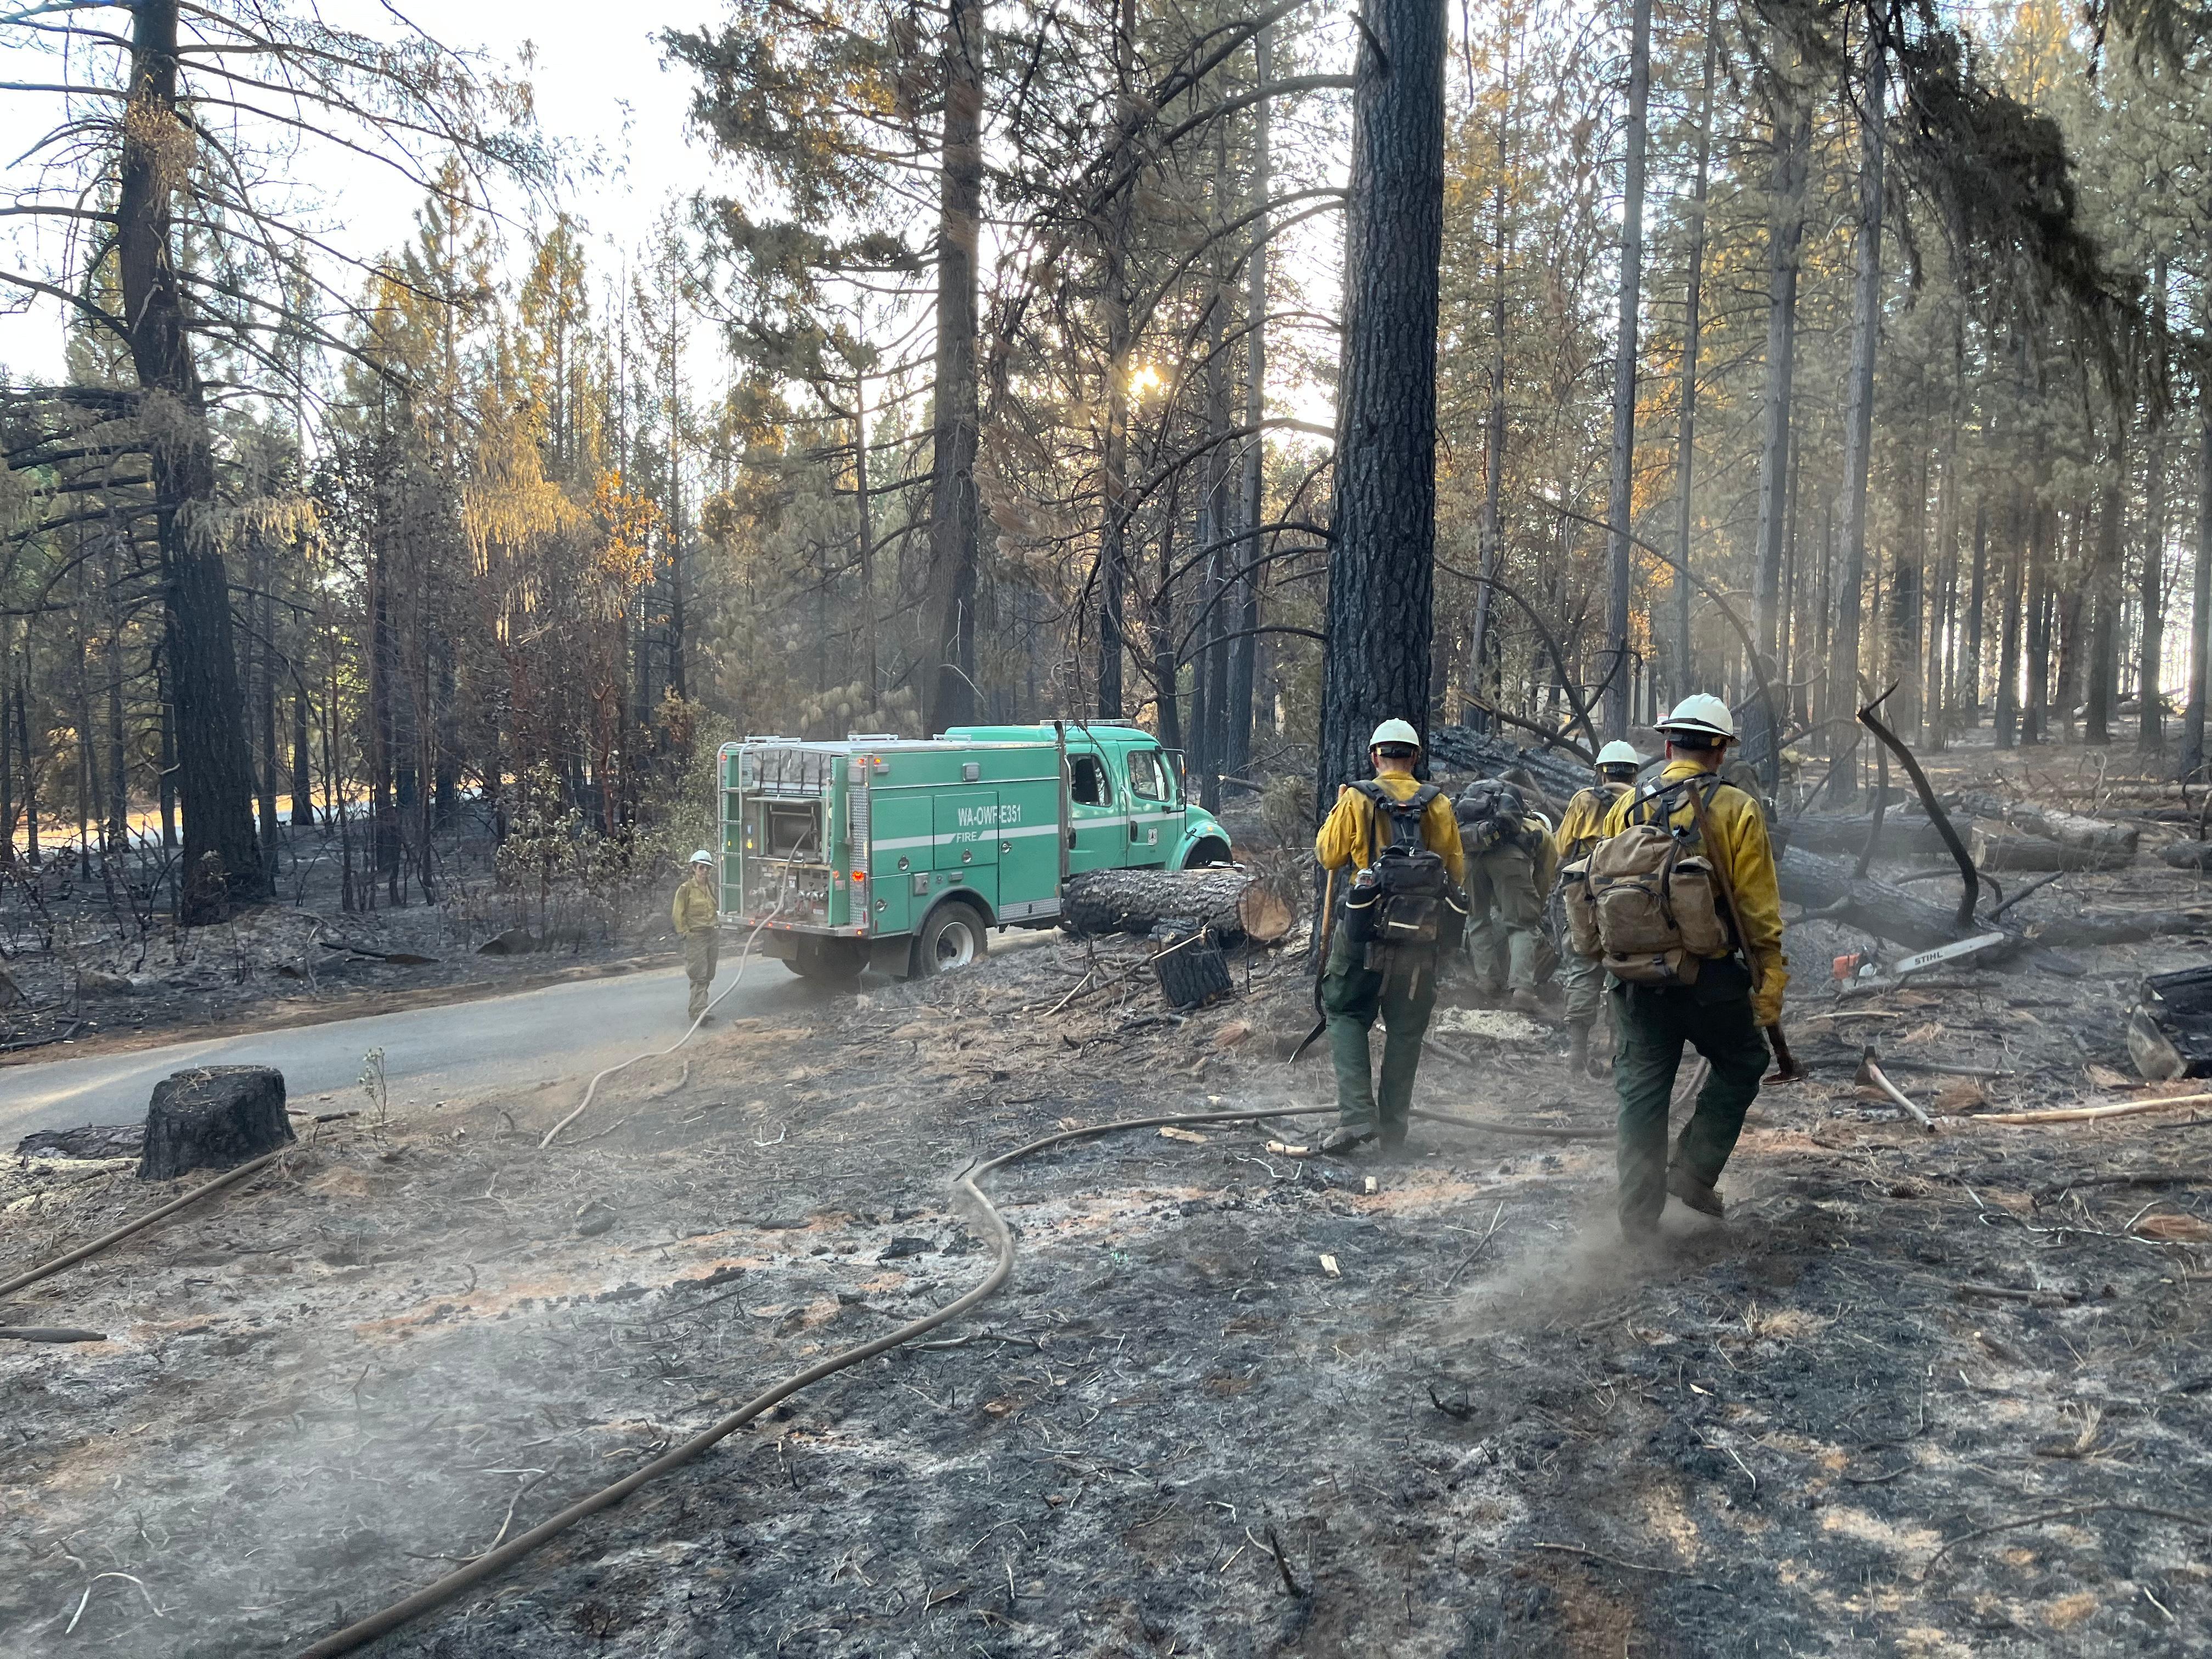 2 firefighters walk through a burned forest to their fire engine that is parked on the road